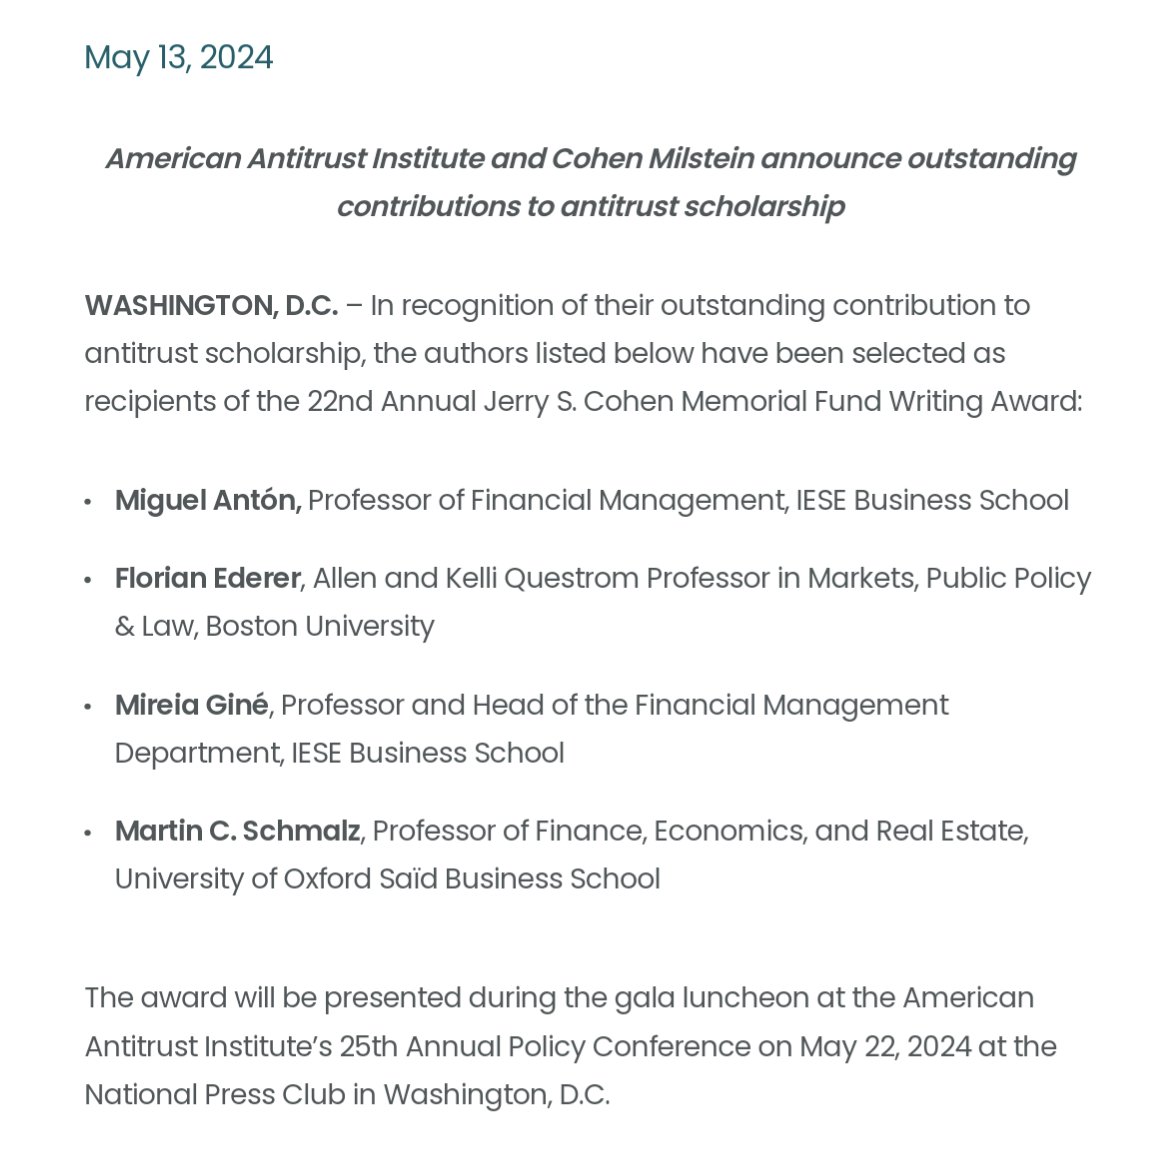 I'm delighted to announce that Miguel Antón, @mireiagine, @martincschmalz, and I have won the 22nd Annual Jerry S. Cohen Antitrust Award for our JPE paper 'Common Ownership, Competition, and Top Management Incentives.' cohenmilstein.com/winners-announ…